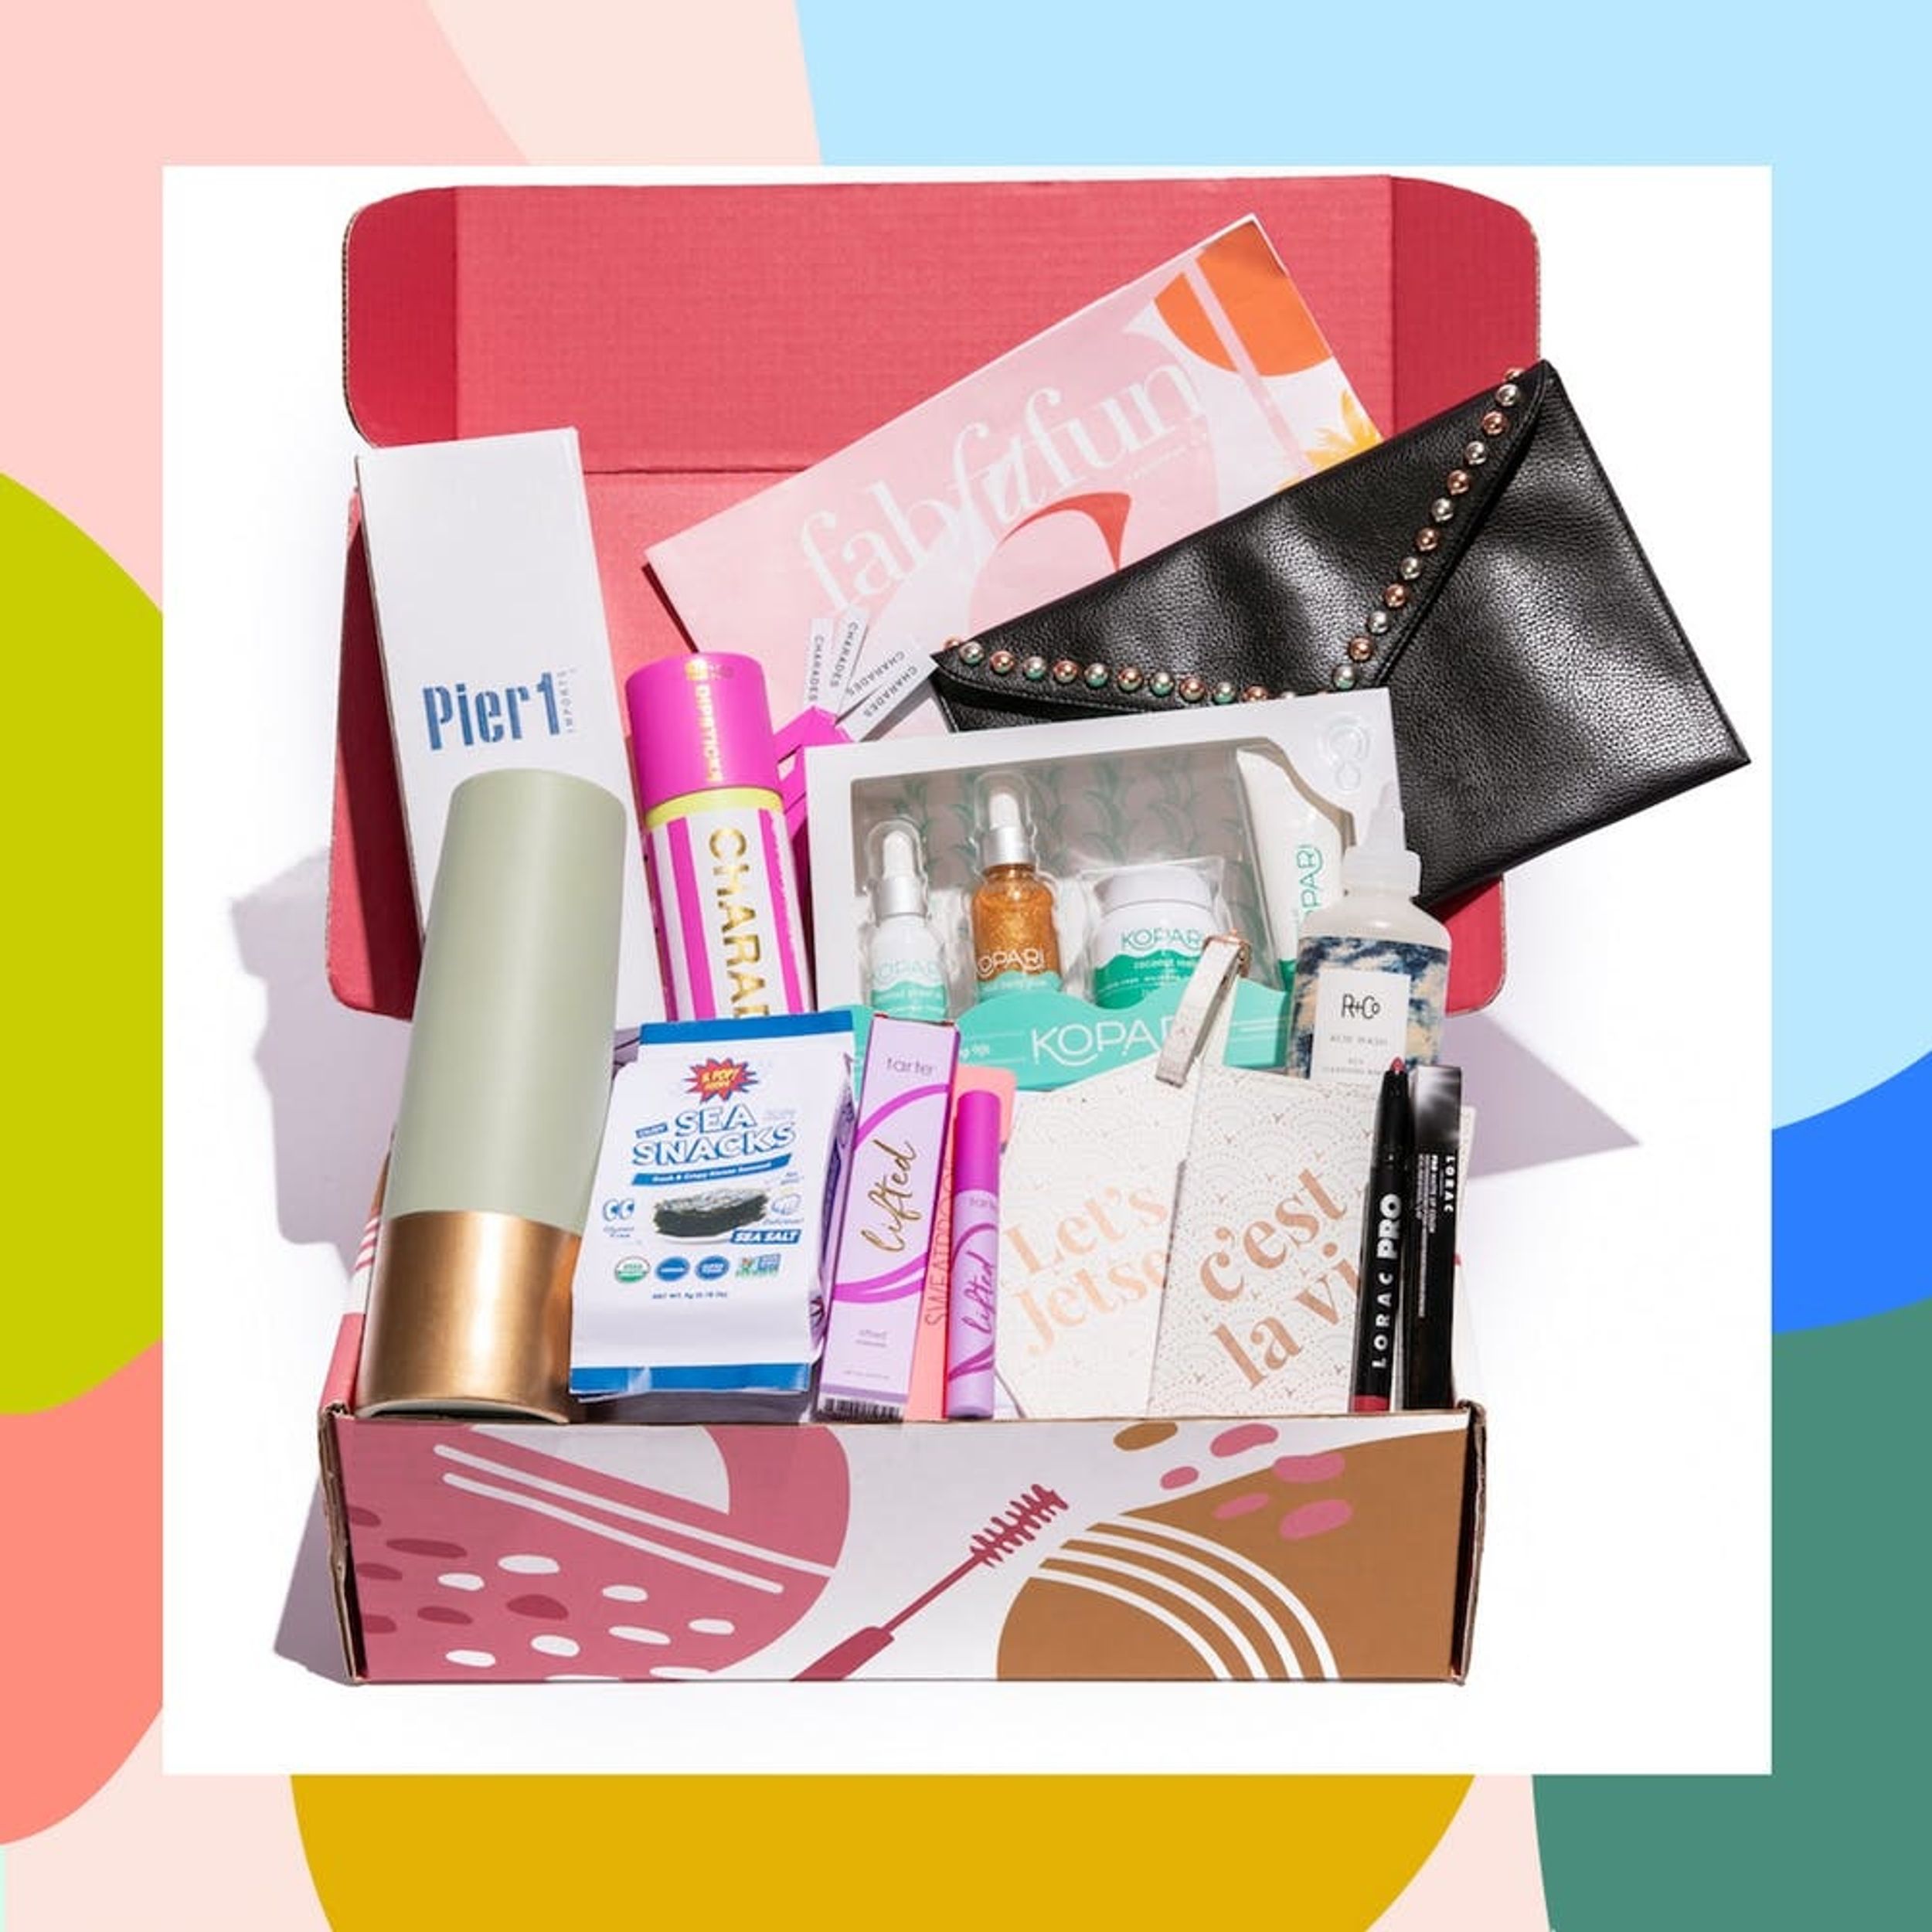 FabFitFun and Pinterest Partner for the Subscription Box of Your Dreams